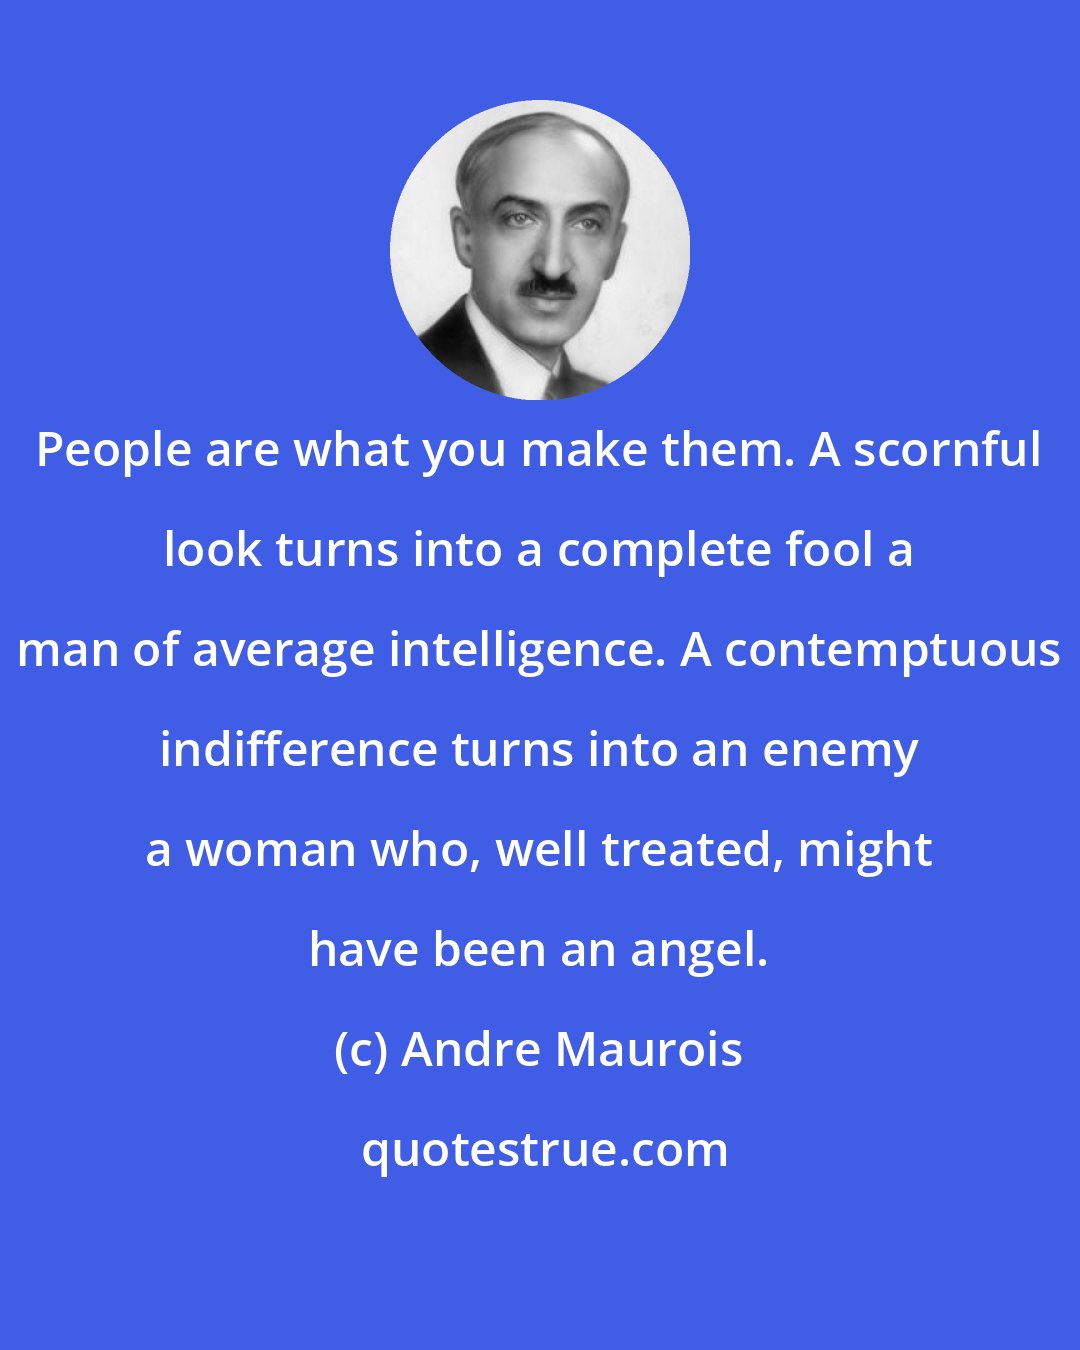 Andre Maurois: People are what you make them. A scornful look turns into a complete fool a man of average intelligence. A contemptuous indifference turns into an enemy a woman who, well treated, might have been an angel.